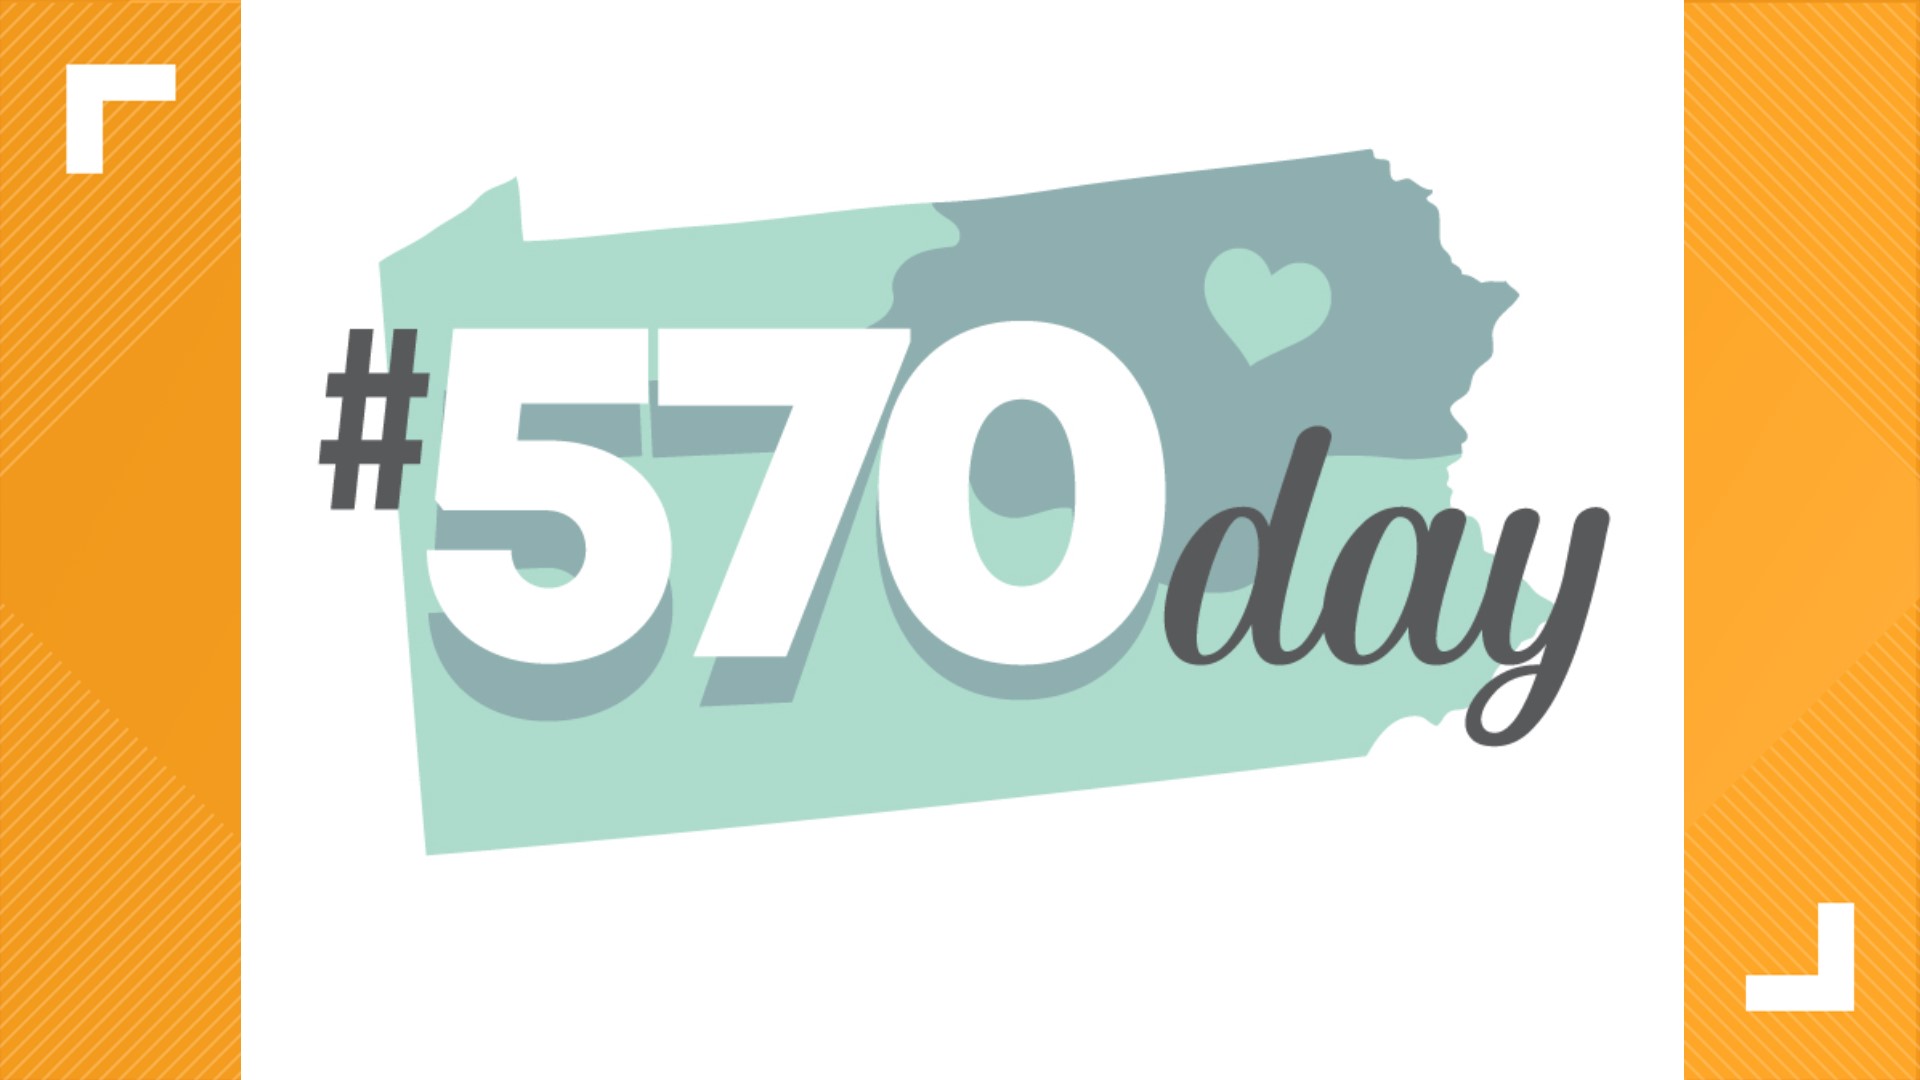 After a tough year due to COVID-19, volunteers hope #570Day on May 7 will help bring new energy and spread positivity across northeastern & central Pennsylvania.